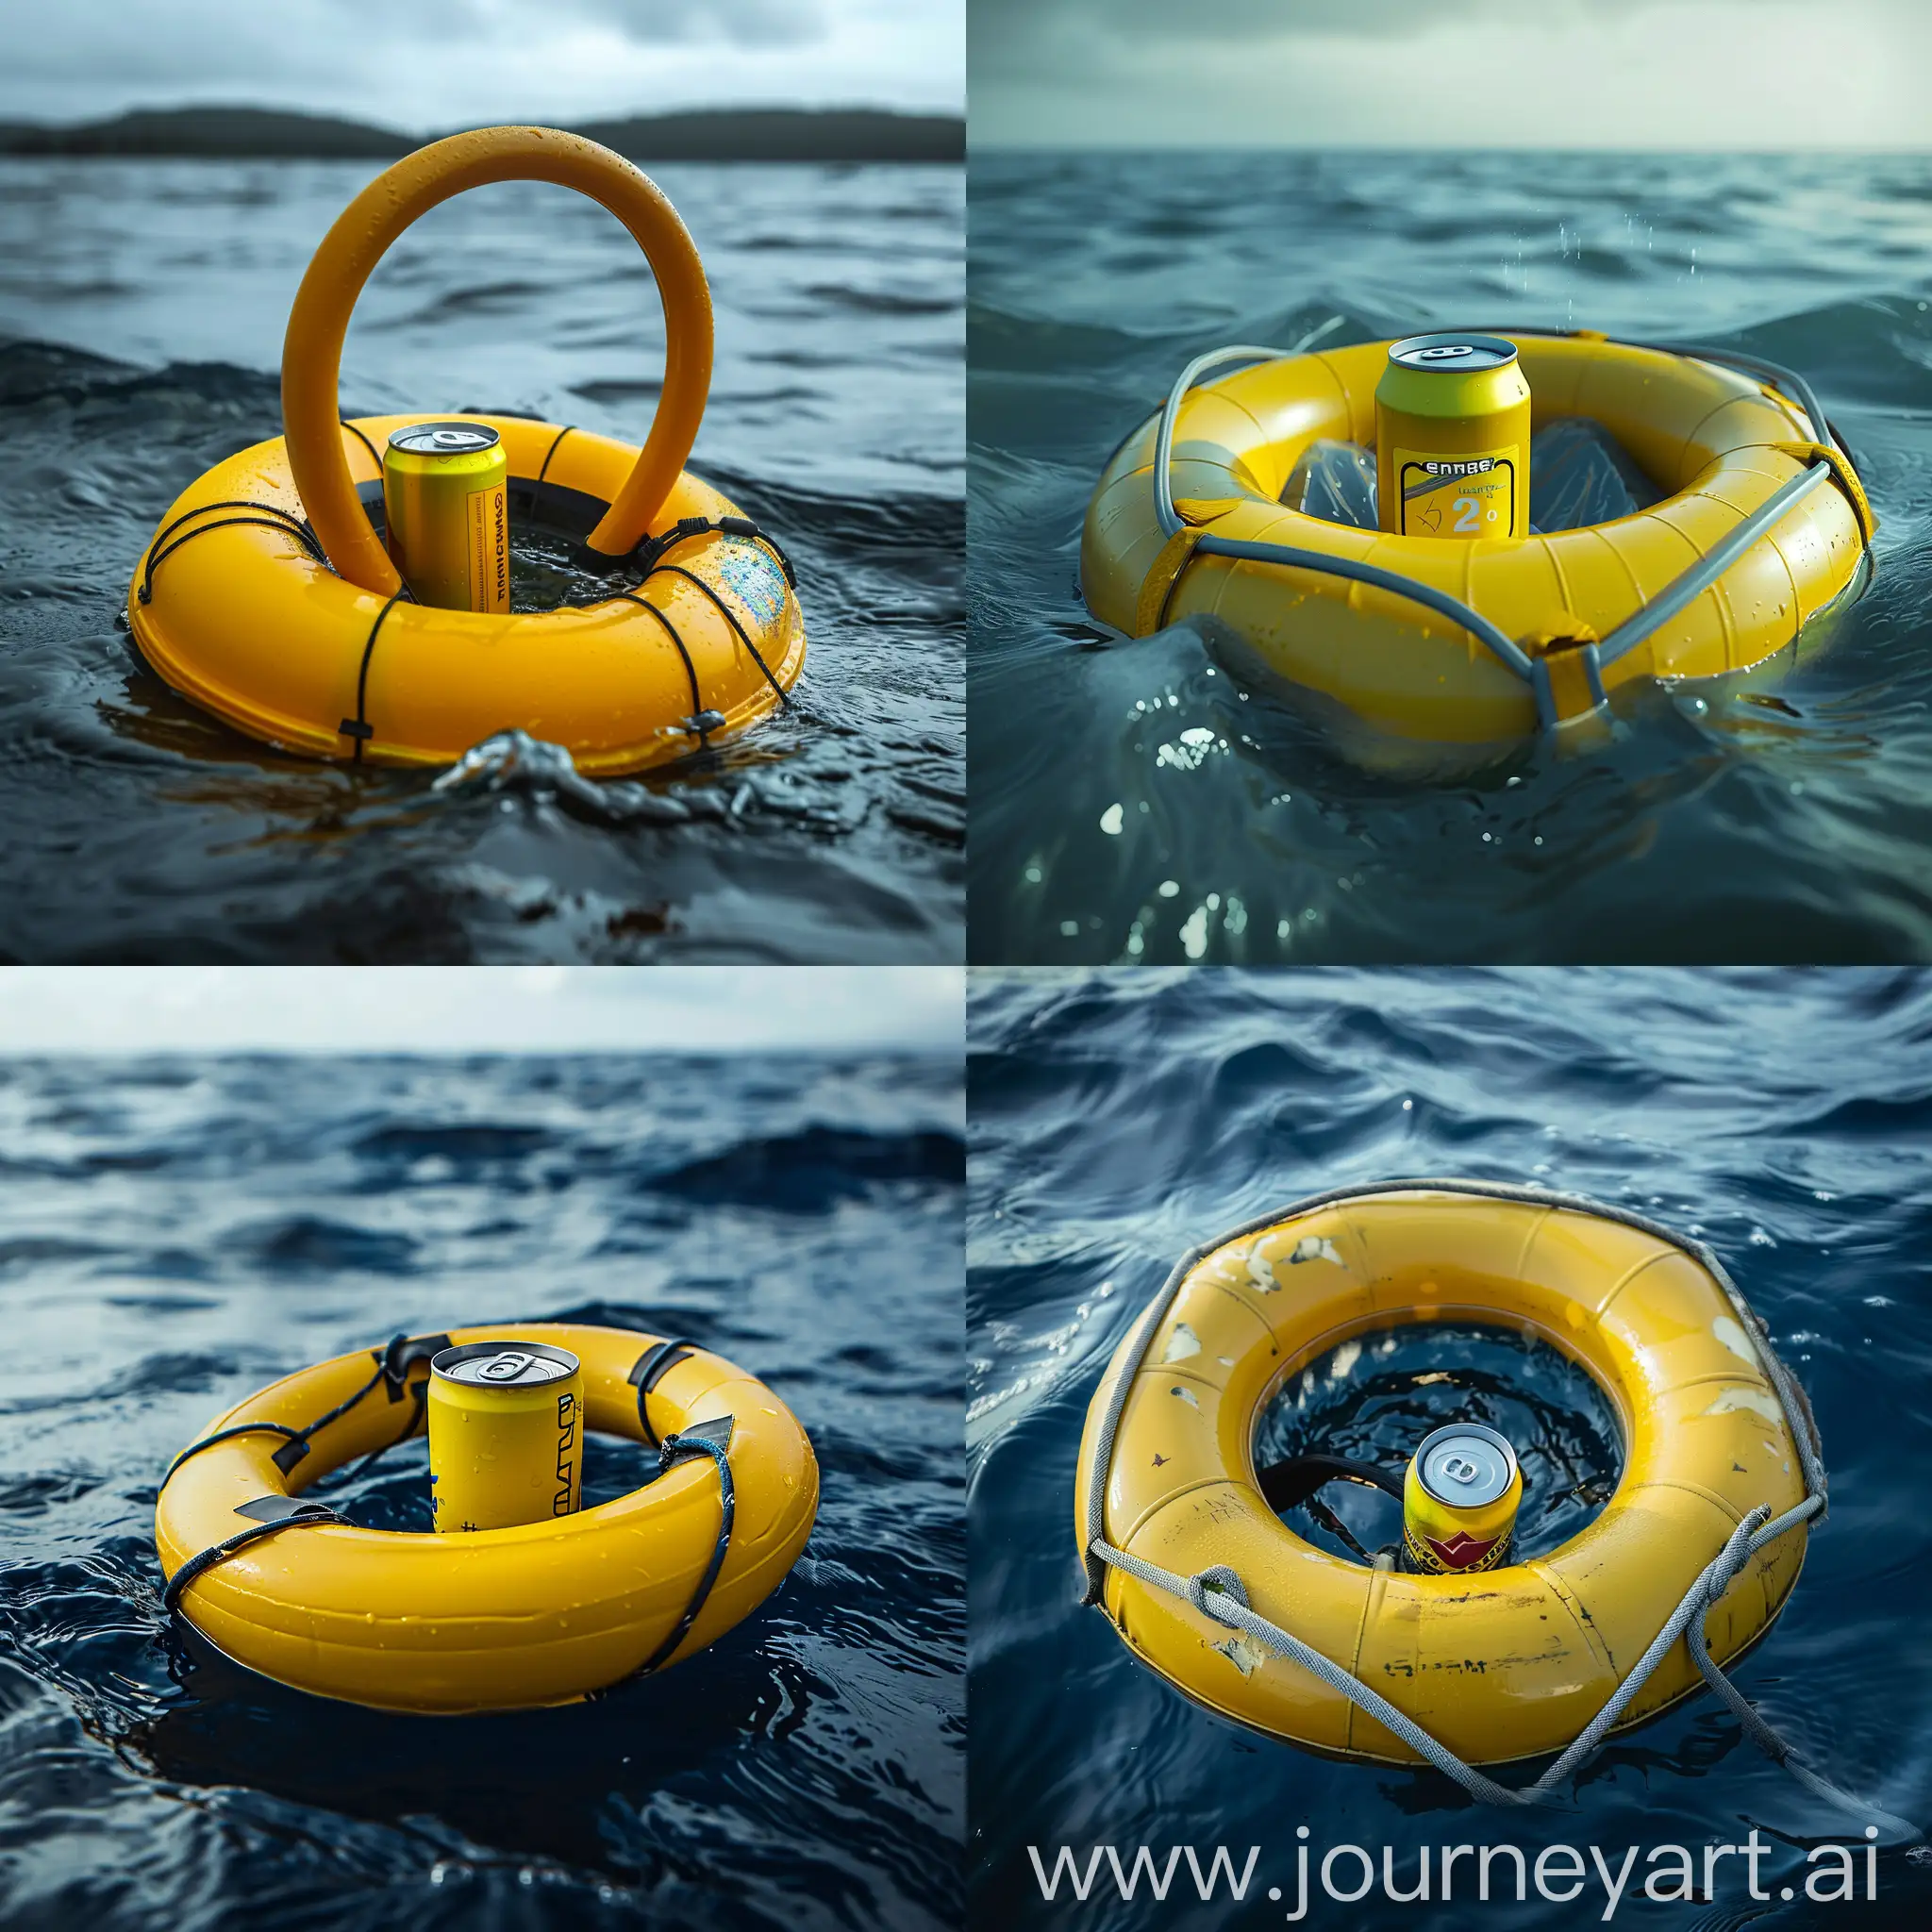  A yellow energy drink can inside a rescue tube in the middle of the sea. The rescue tube is completely around the can. photorealistic